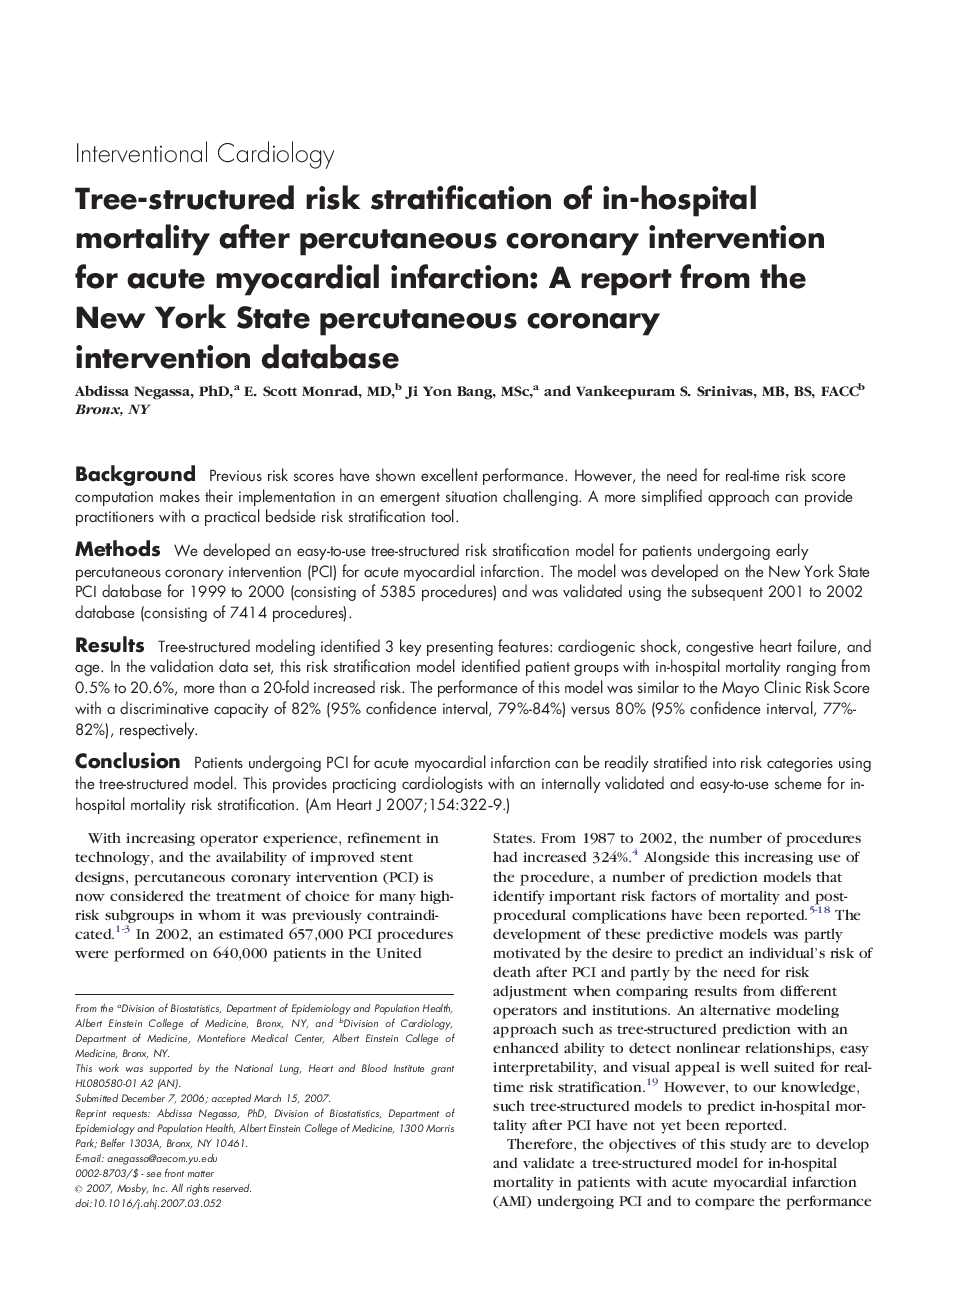 Tree-structured risk stratification of in-hospital mortality after percutaneous coronary intervention for acute myocardial infarction: A report from the New York State percutaneous coronary intervention database 